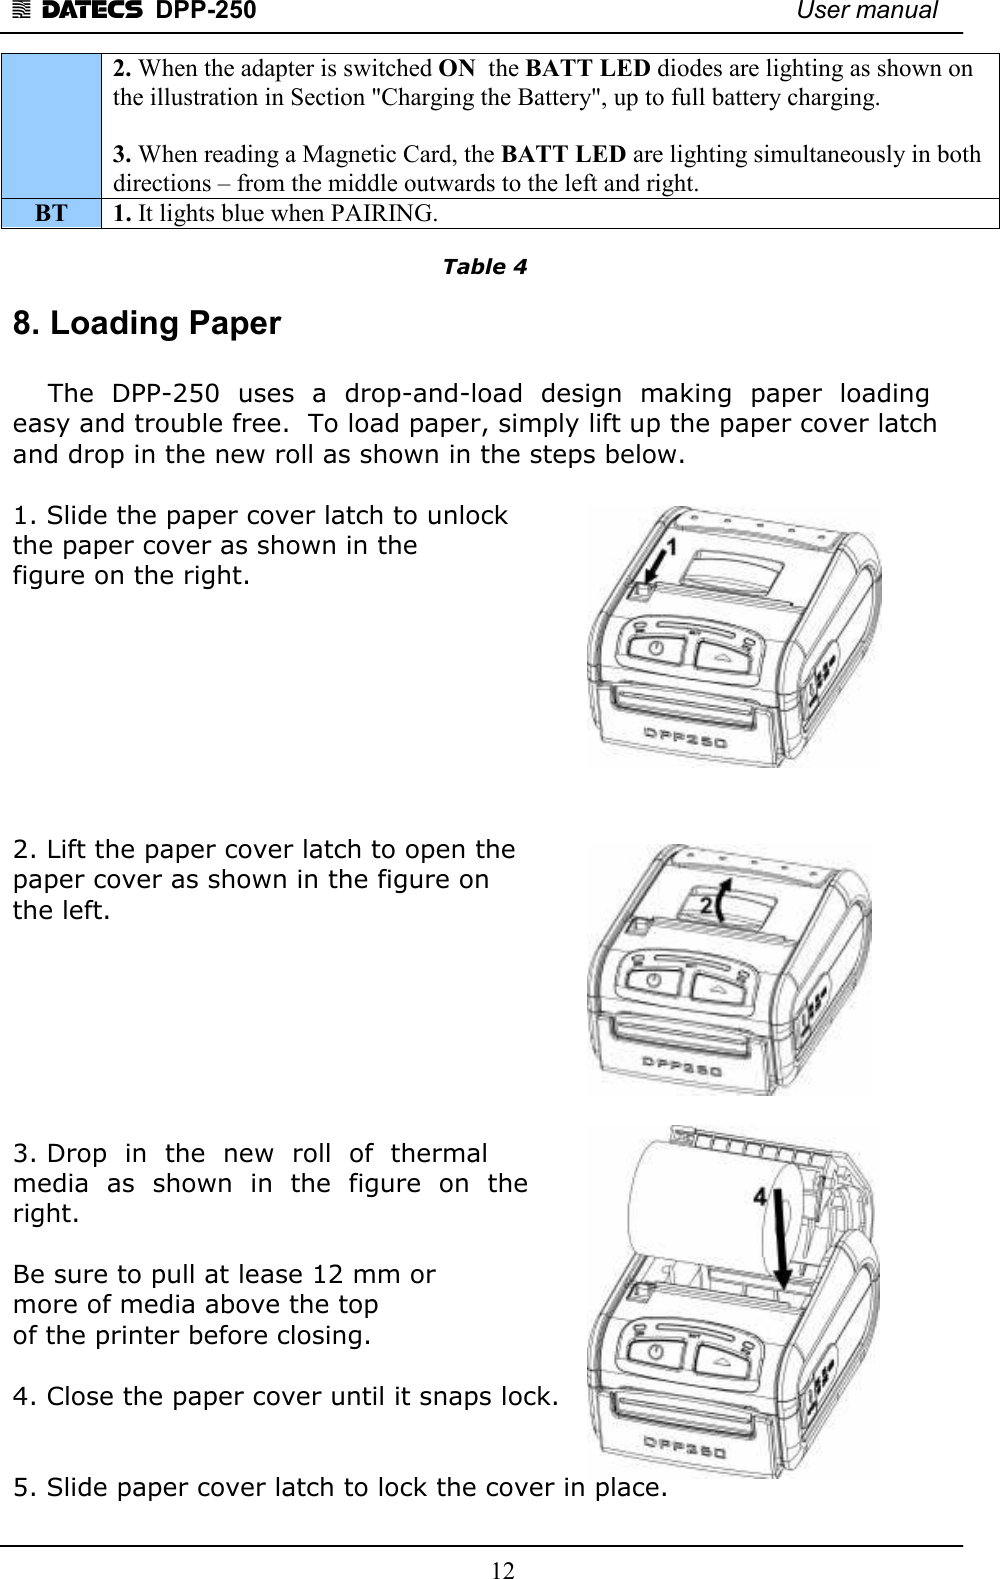 1 DATECS  DPP-250    User manual     12 2. When the adapter is switched ON  the BATT LED diodes are lighting as shown on the illustration in Section &quot;Charging the Battery&quot;, up to full battery charging.  3. When reading a Magnetic Card, the BATT LED are lighting simultaneously in both directions – from the middle outwards to the left and right.     BT  1. It lights blue when PAIRING.  Table 4 8. Loading Paper      The  DPP-250  uses  a  drop-and-load  design  making  paper  loading easy and trouble free.  To load paper, simply lift up the paper cover latch and drop in the new roll as shown in the steps below.  1. Slide the paper cover latch to unlock  the paper cover as shown in the  figure on the right.         2. Lift the paper cover latch to open the  paper cover as shown in the figure on  the left.        3. Drop  in  the  new  roll  of  thermal  media  as  shown  in  the  figure  on  the  right.    Be sure to pull at lease 12 mm or  more of media above the top  of the printer before closing.  4. Close the paper cover until it snaps lock.   5. Slide paper cover latch to lock the cover in place. 